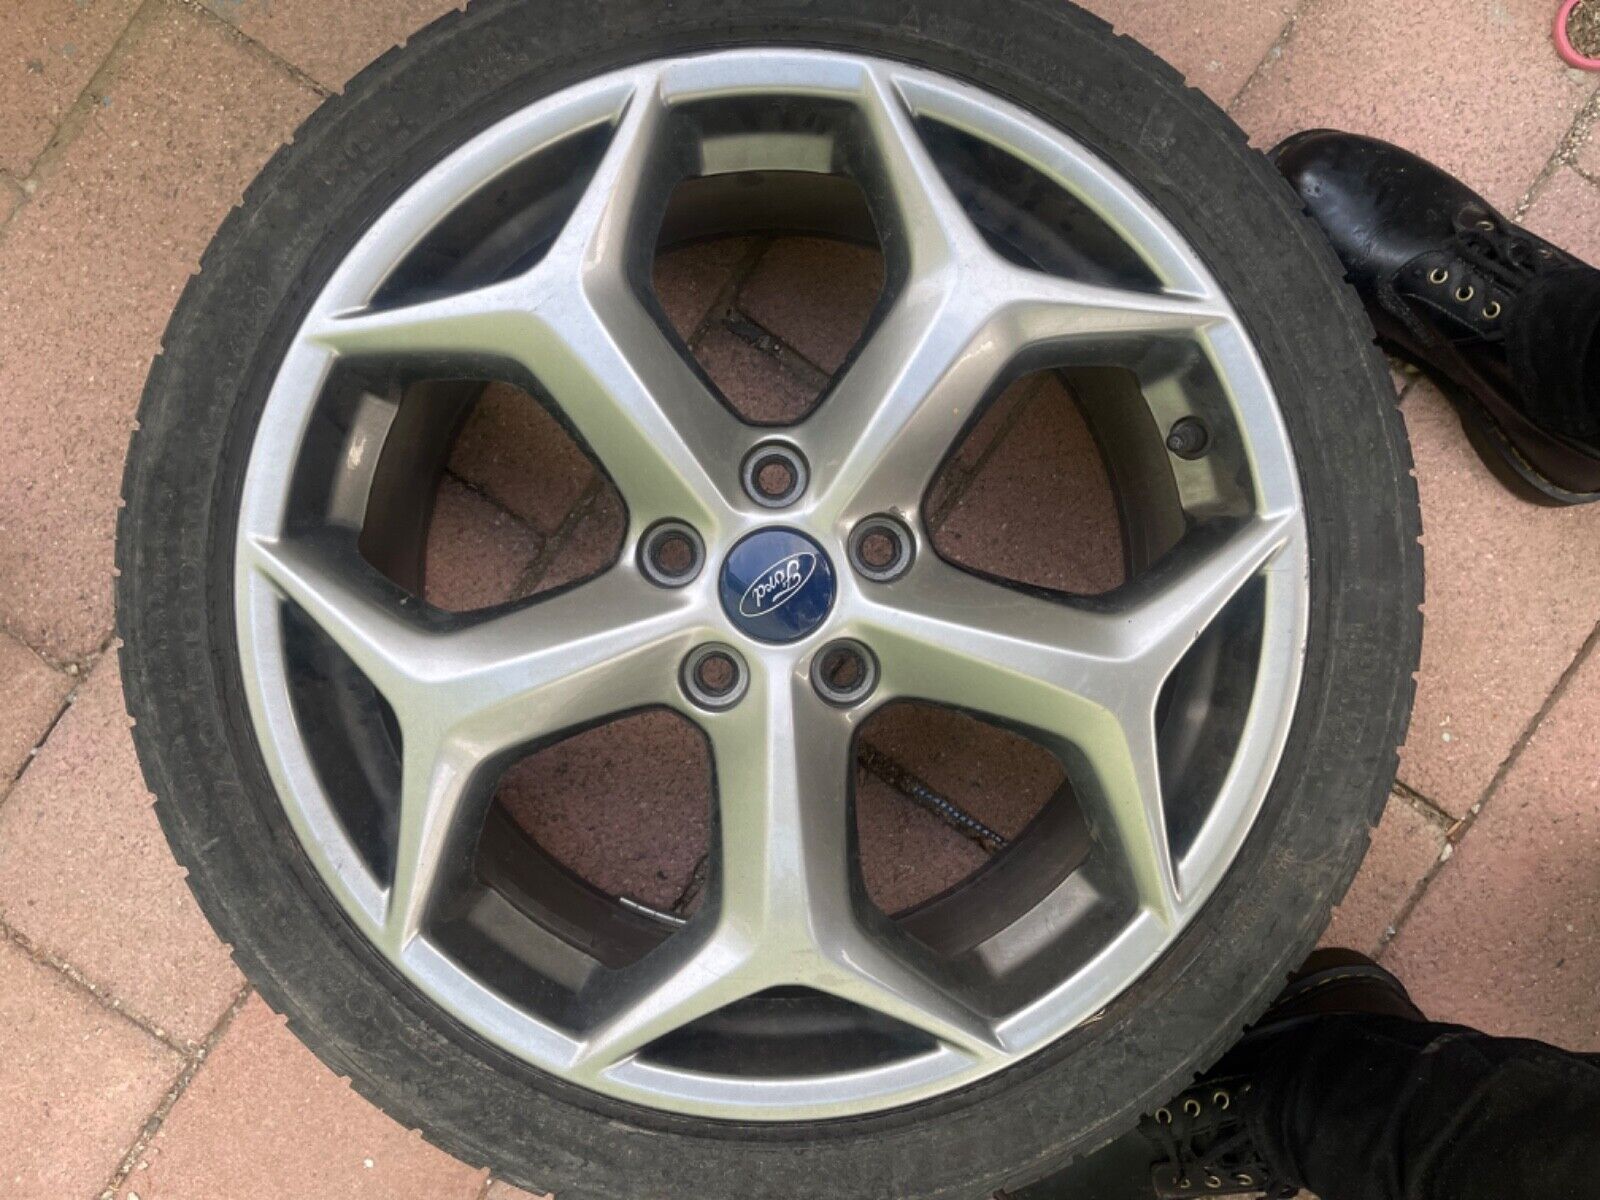 Used Ford Focus ST Wheels with tires. Slight damage to two of them.